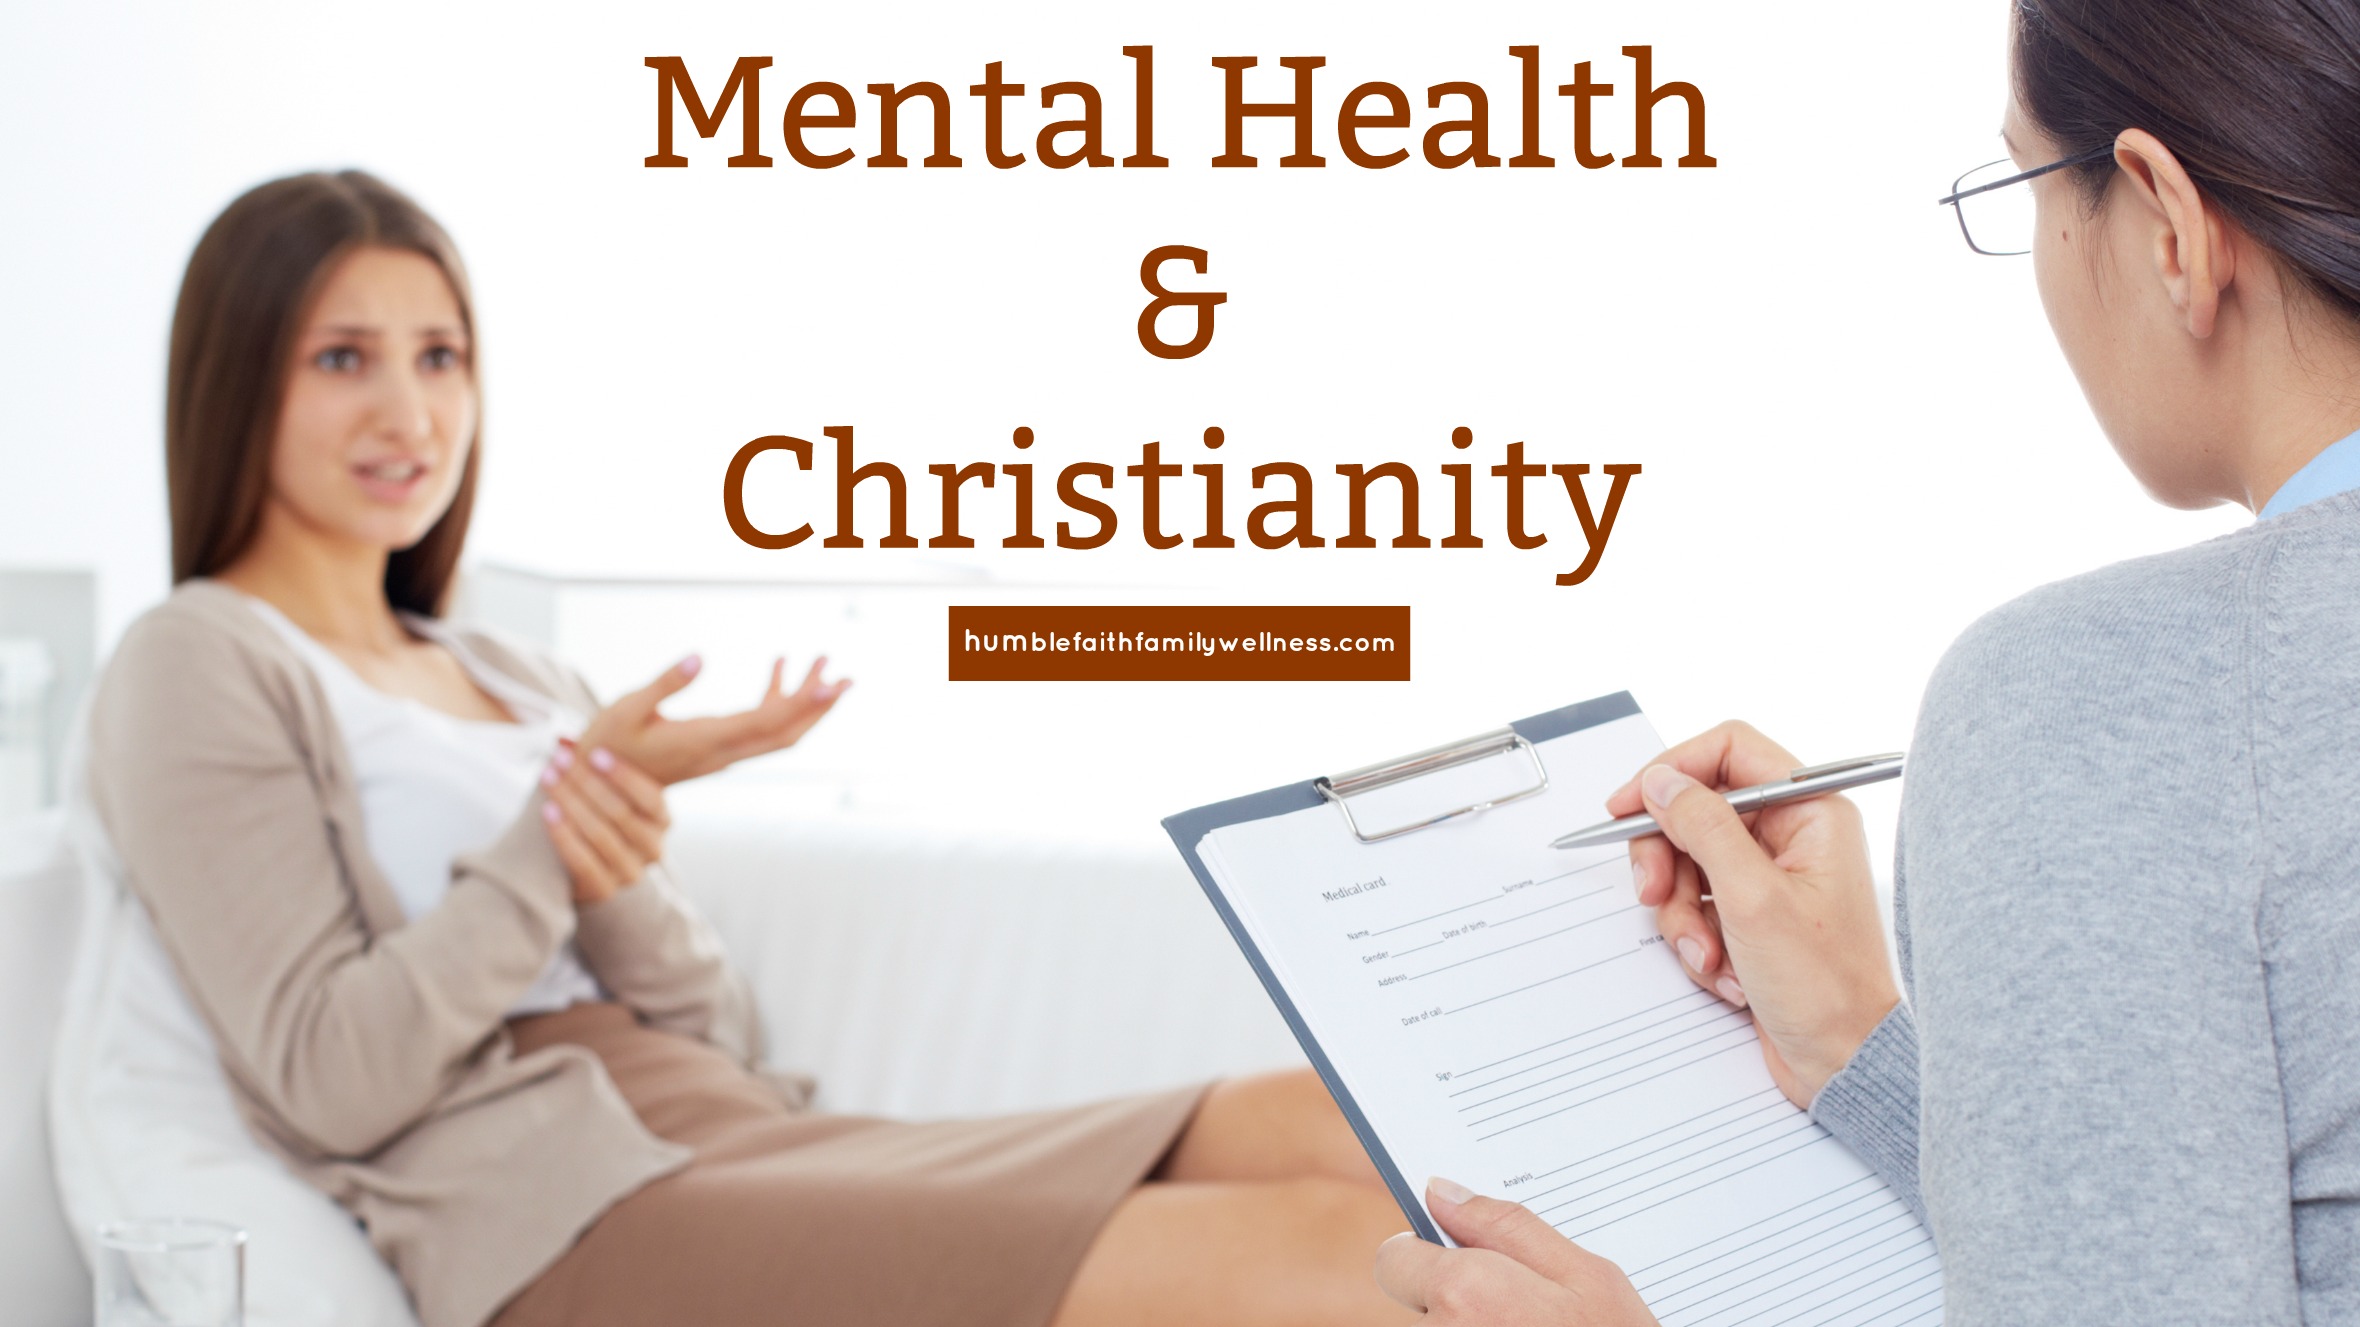 Mental health and Christianity